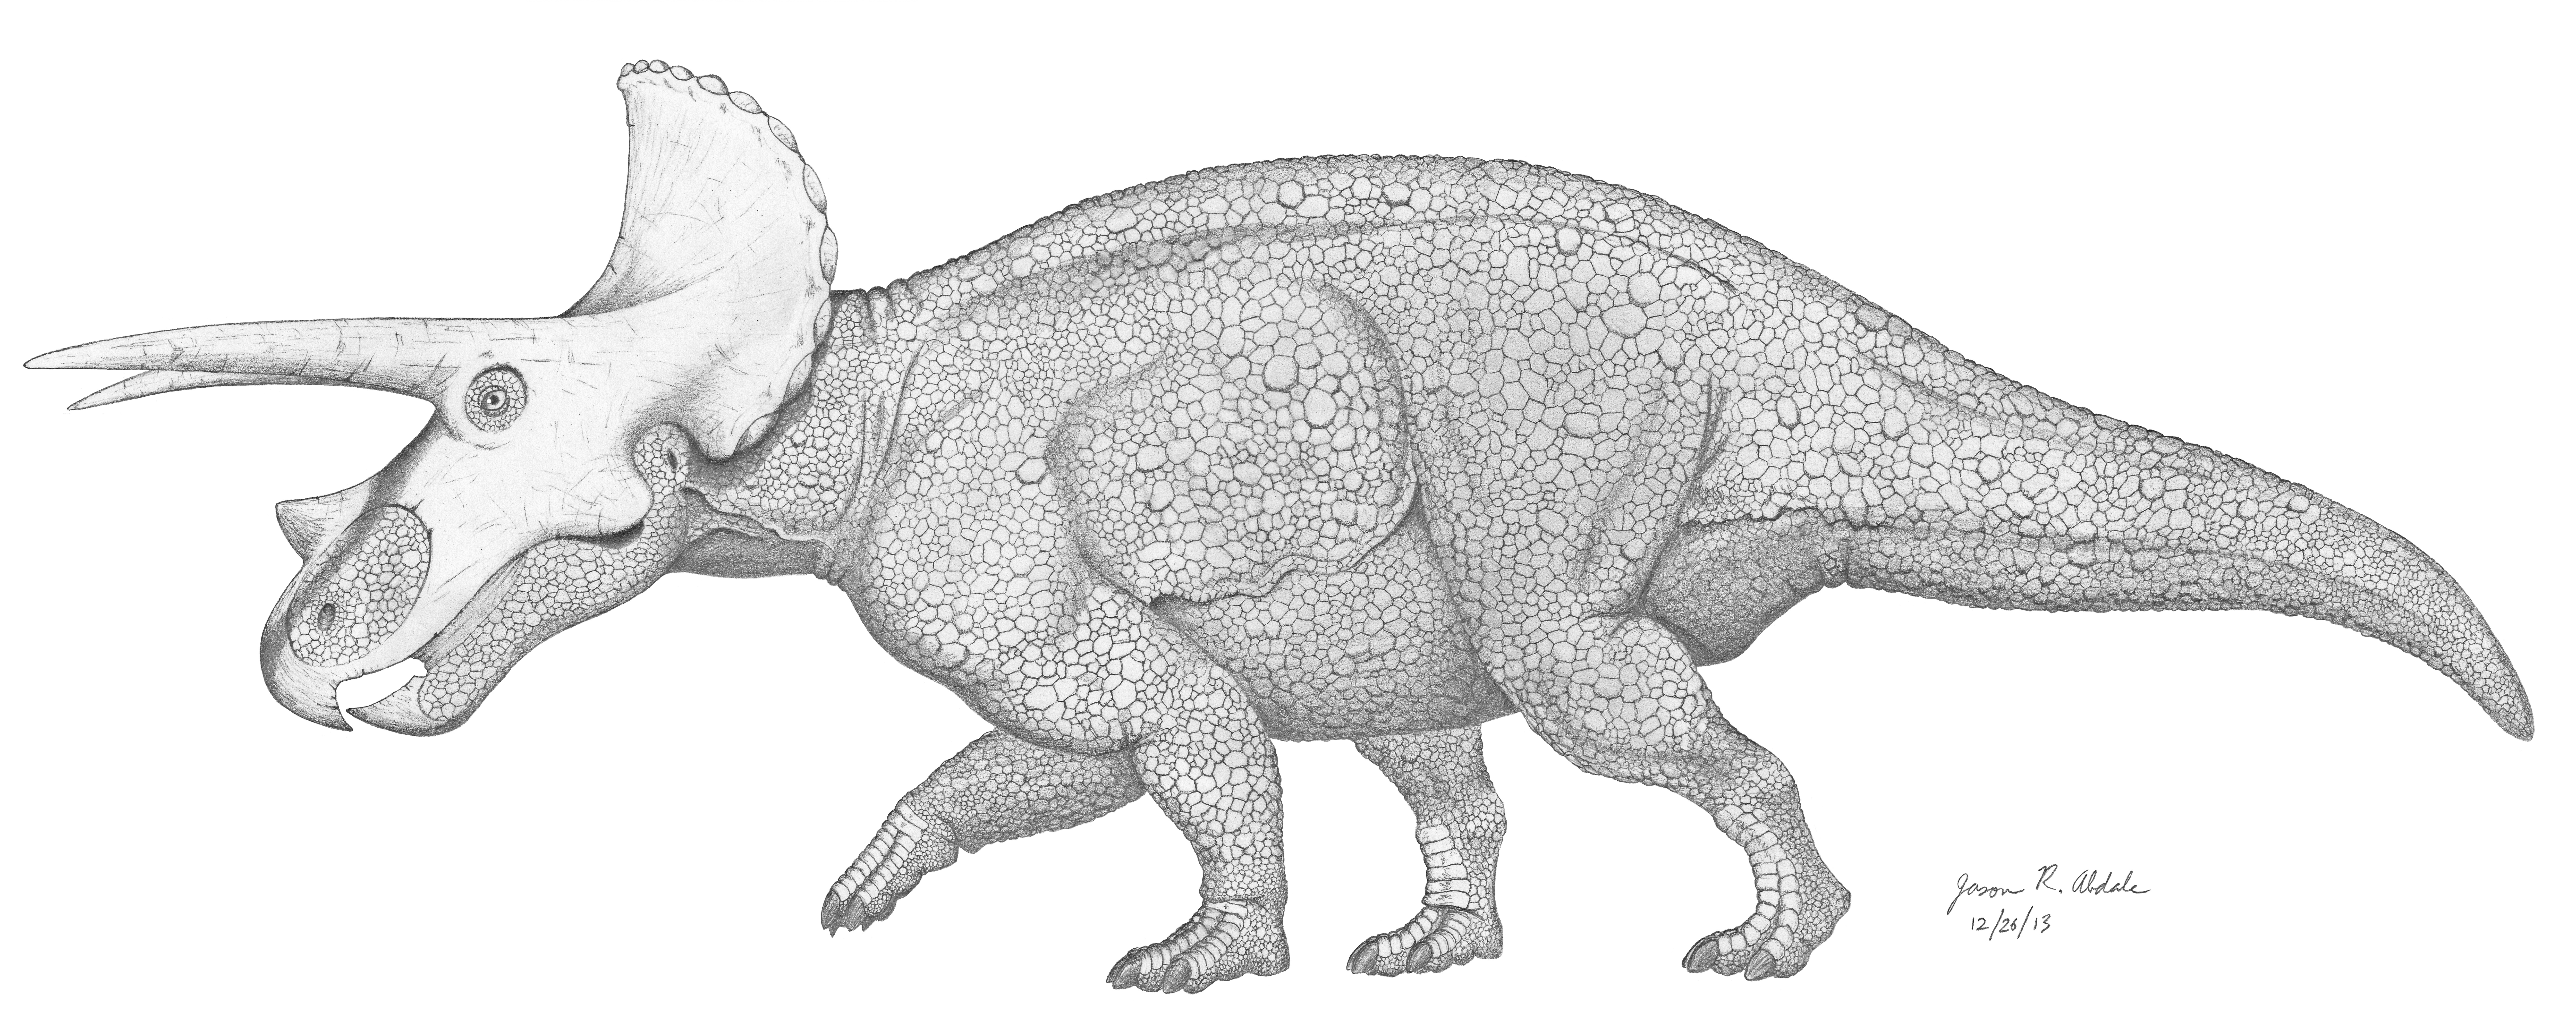 picture triceratops triceratops wikipedia triceratops picture 